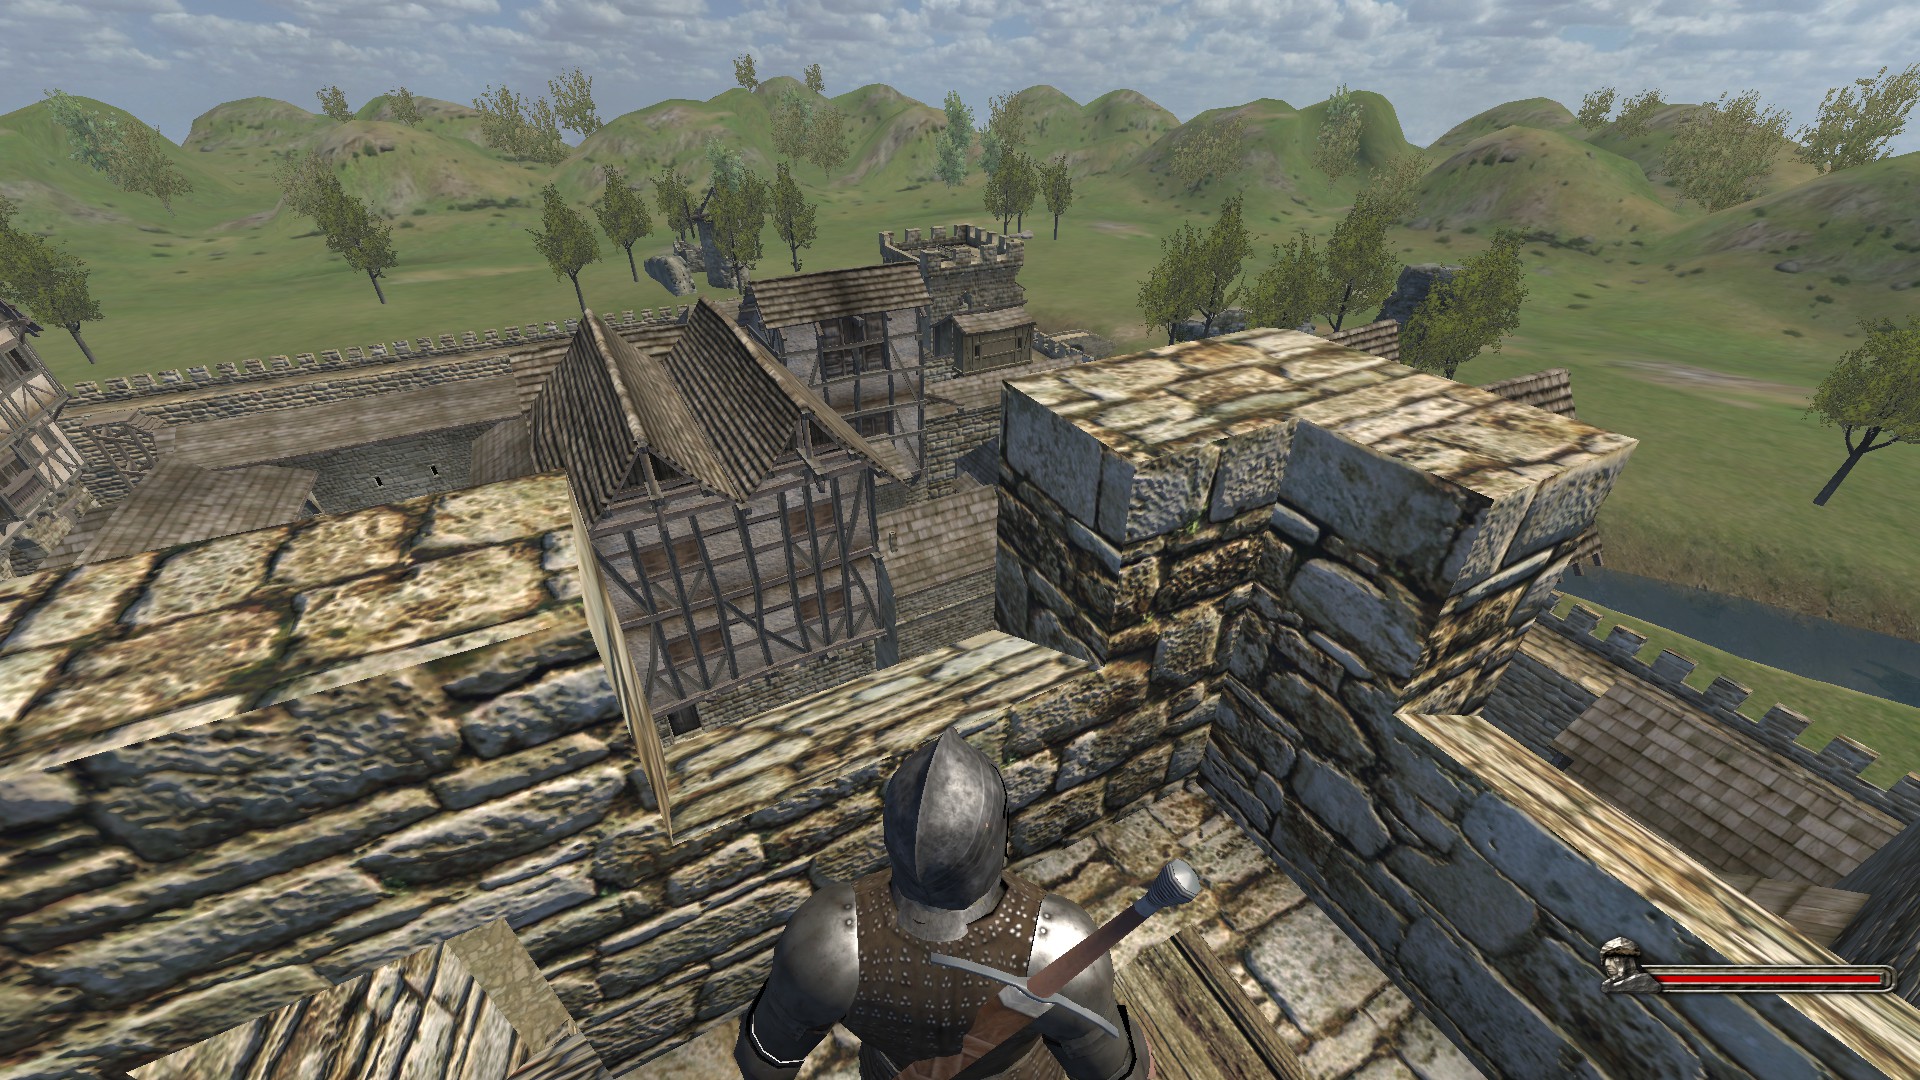 Warband города. Mount and Blade город. Mount and Blade Warband City. Warband Rust. Warband Parabellum.